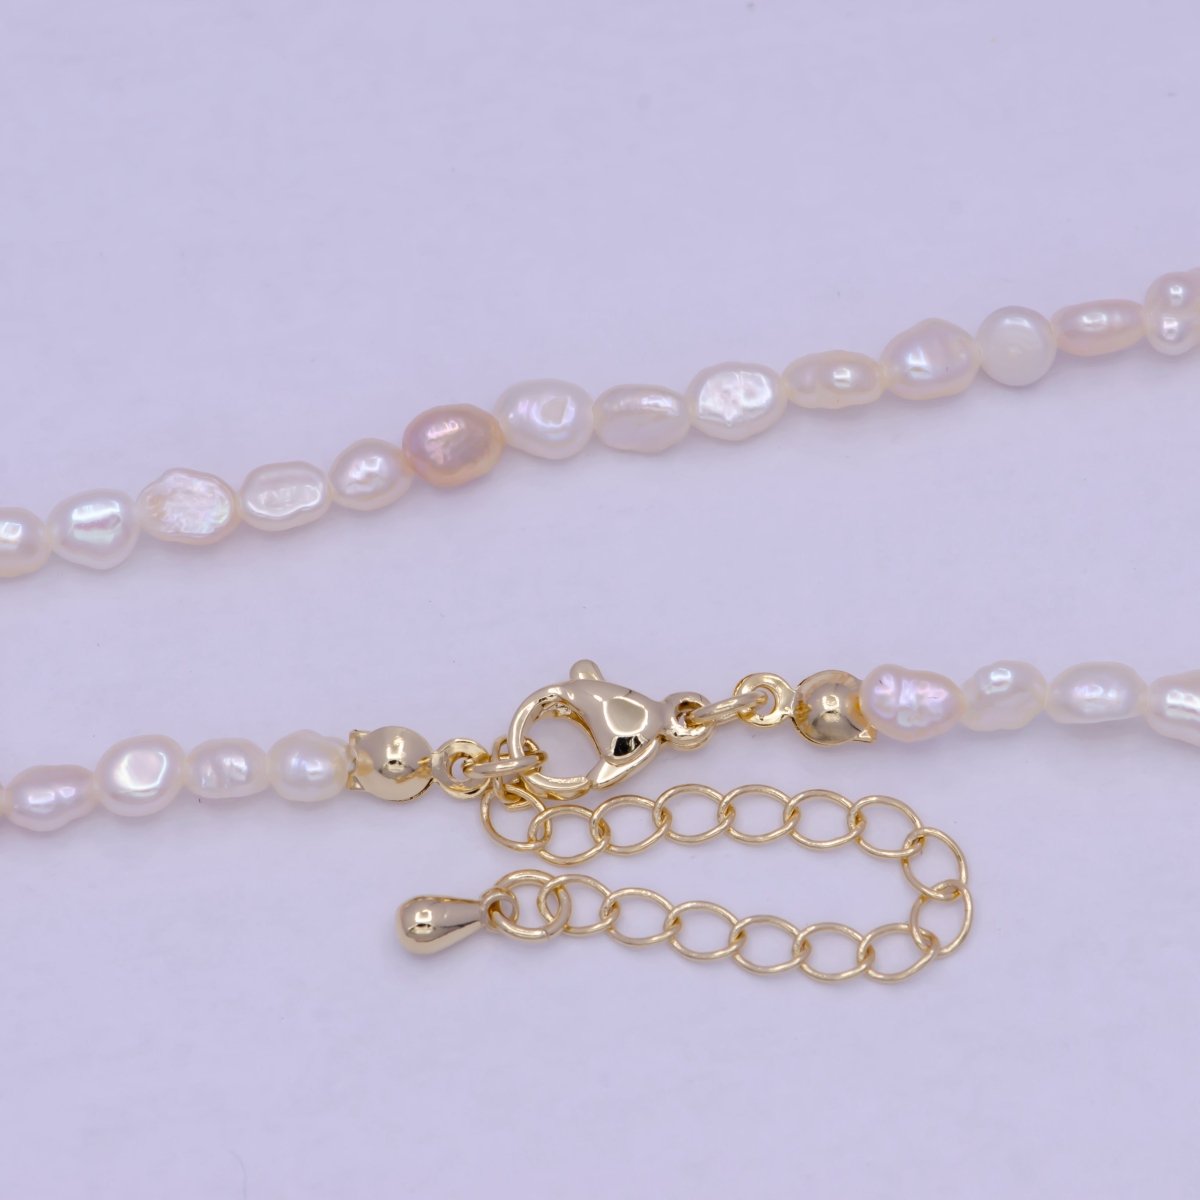 Vintage Soft Pink Irregular freshwater pearls necklace 14.5 inch + 2 inch extender in 24k Gold Filled Necklace | WA-1162 Clearance Pricing - DLUXCA